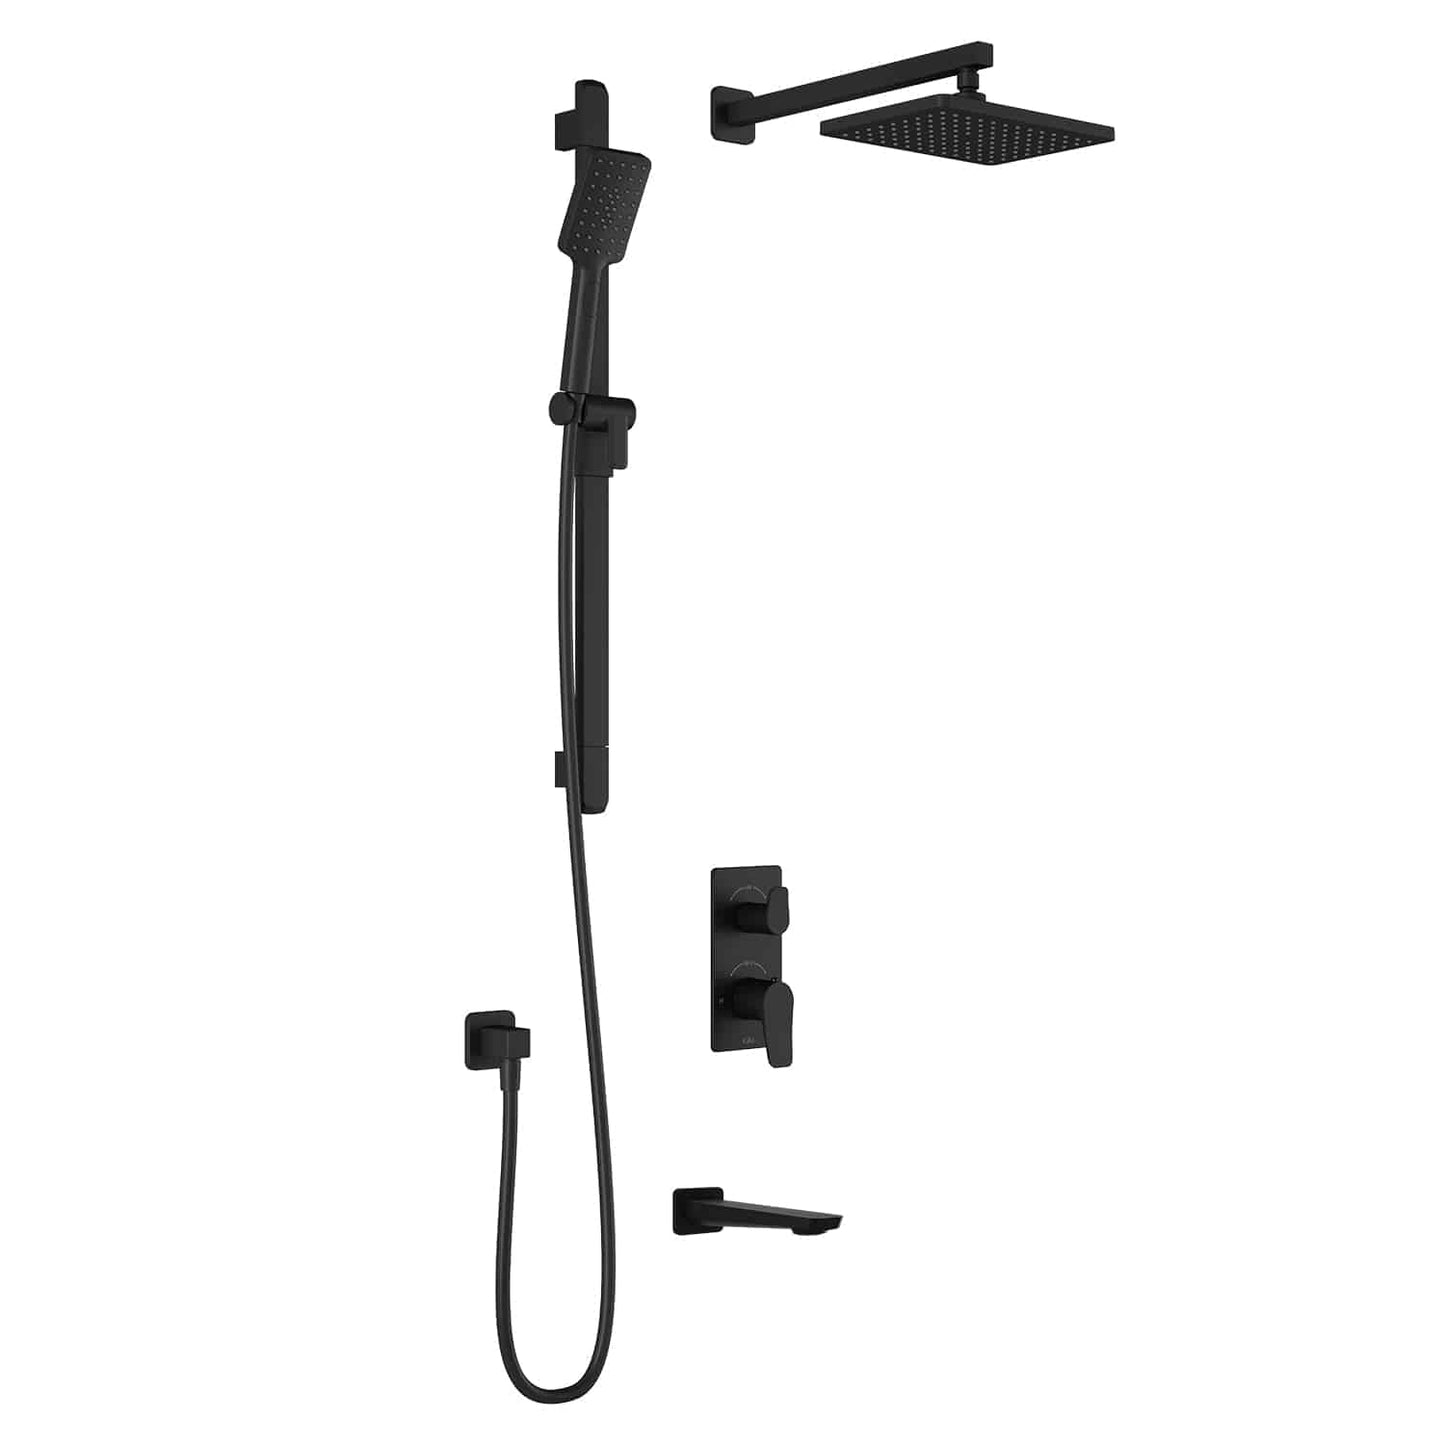 Kalia MOROKA TD3 (Valve Not Included) AQUATONIK T/P with Diverter Shower System with Wall Arm- Matte Black